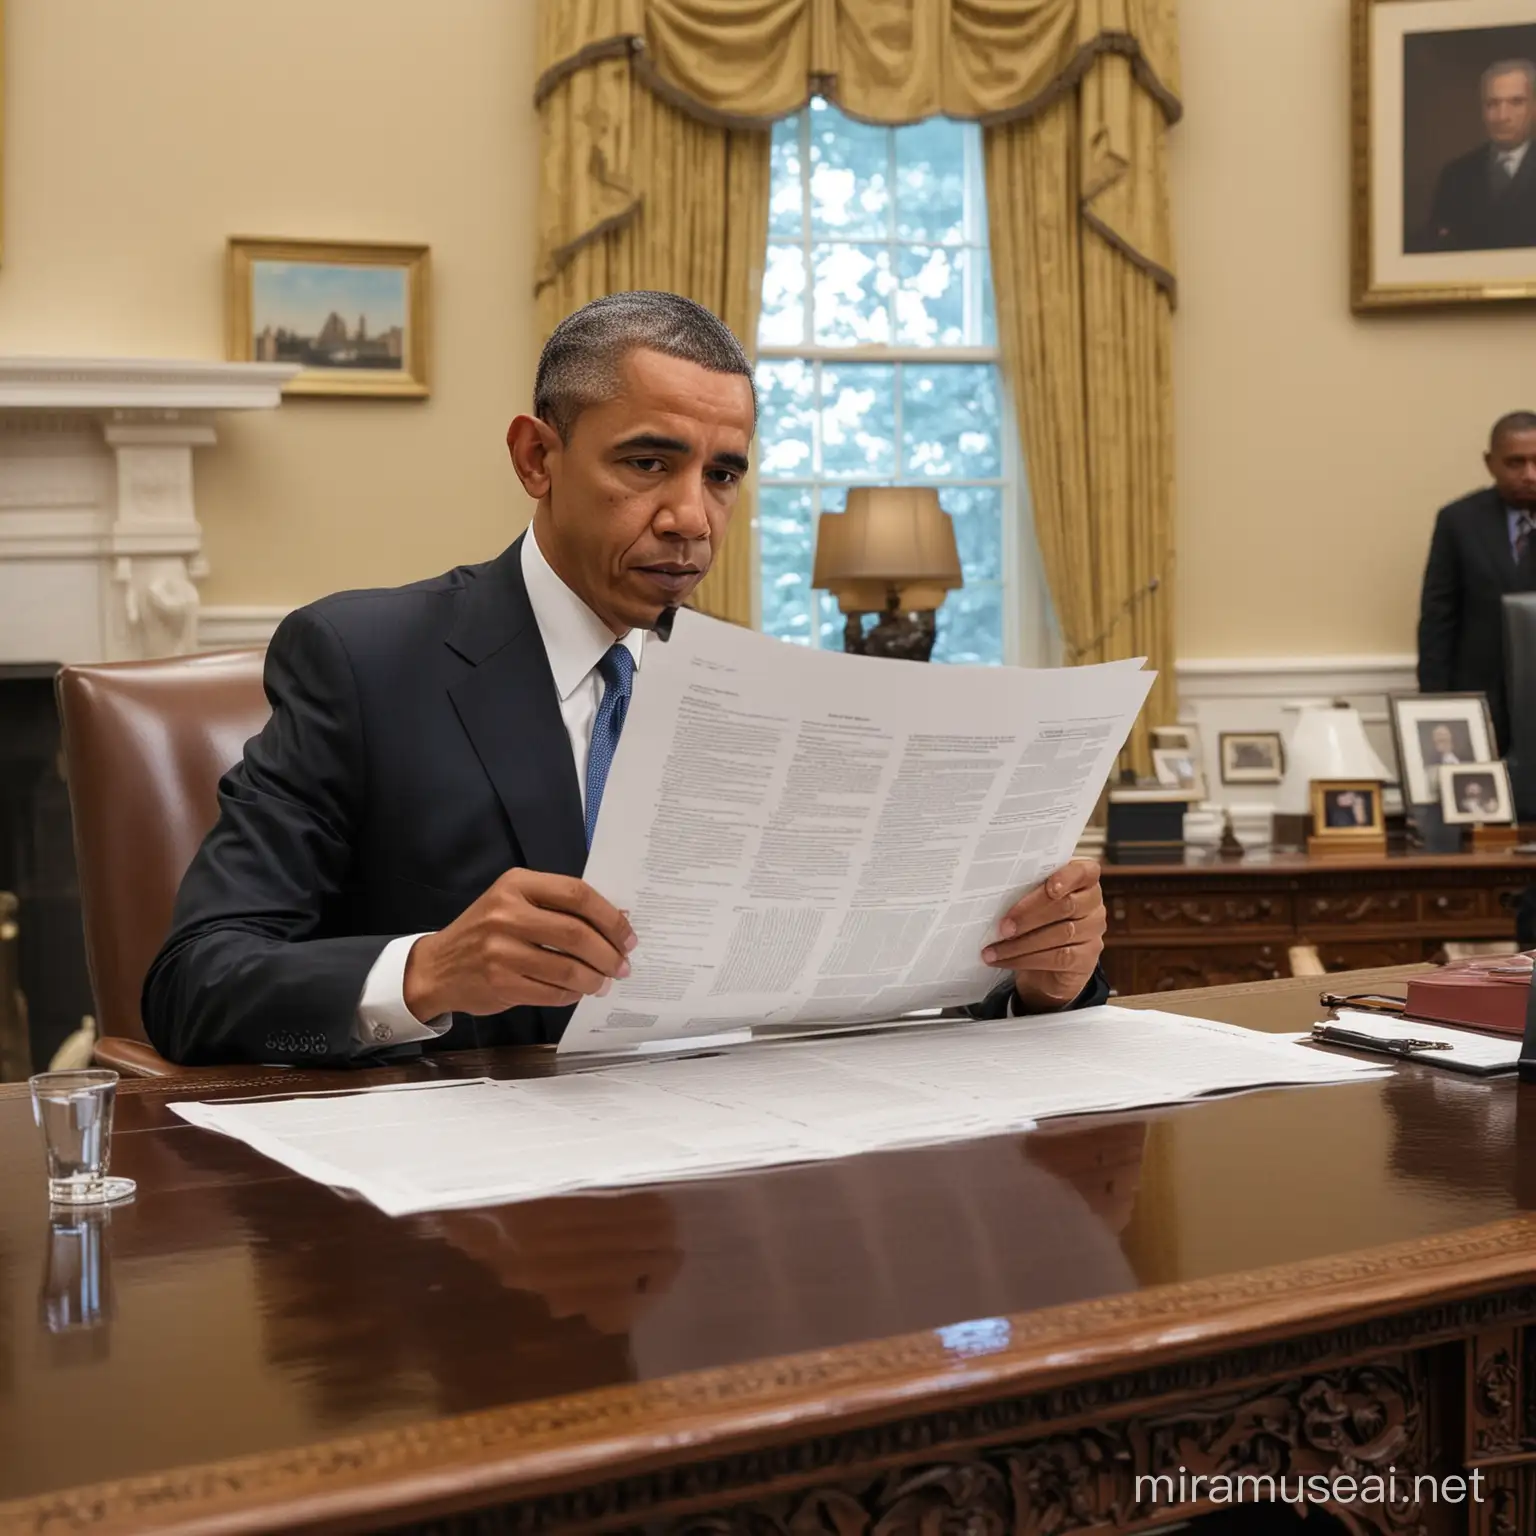 President Obama Analyzing Documents in Oval Office